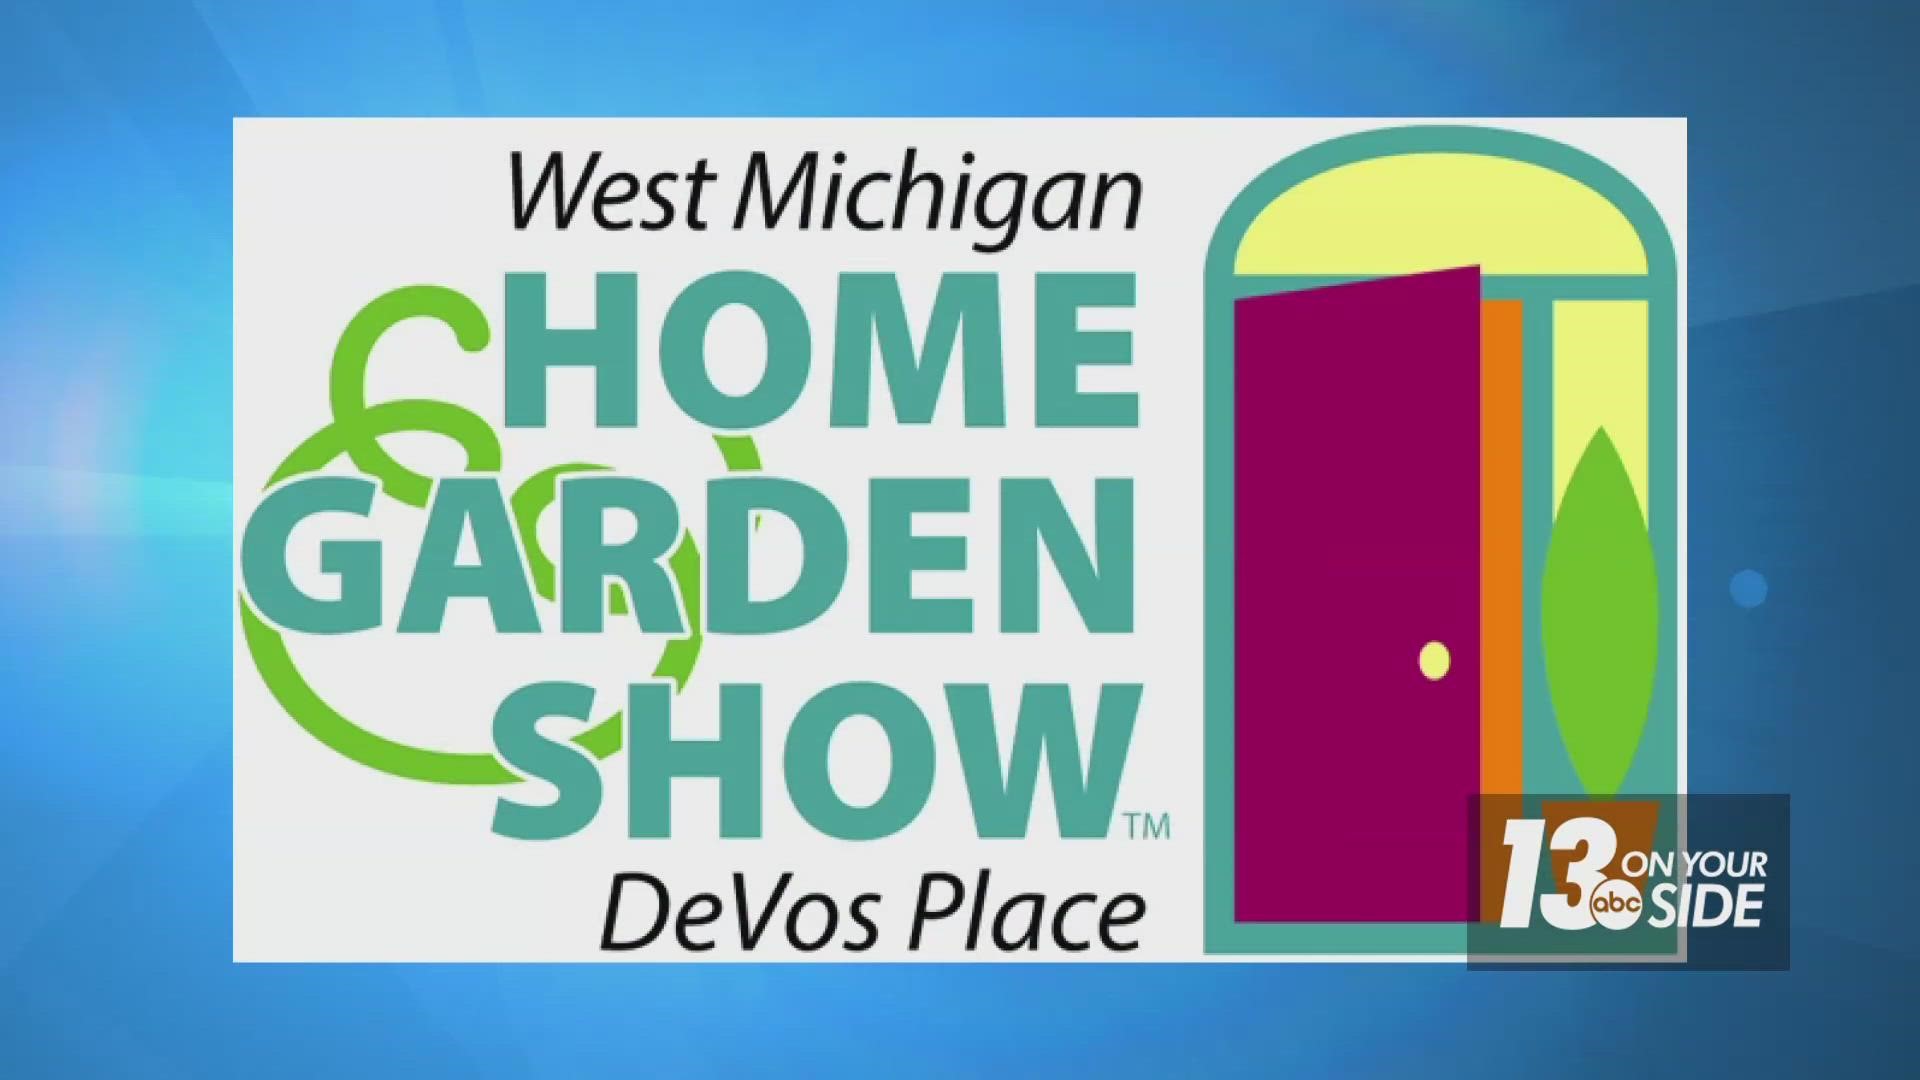 Lisa Steinkopf is The Houseplant Guru, and she will be in Grand Rapids as part of the West Michigan Home & Garden Show, March 2-5 at DeVos Place.